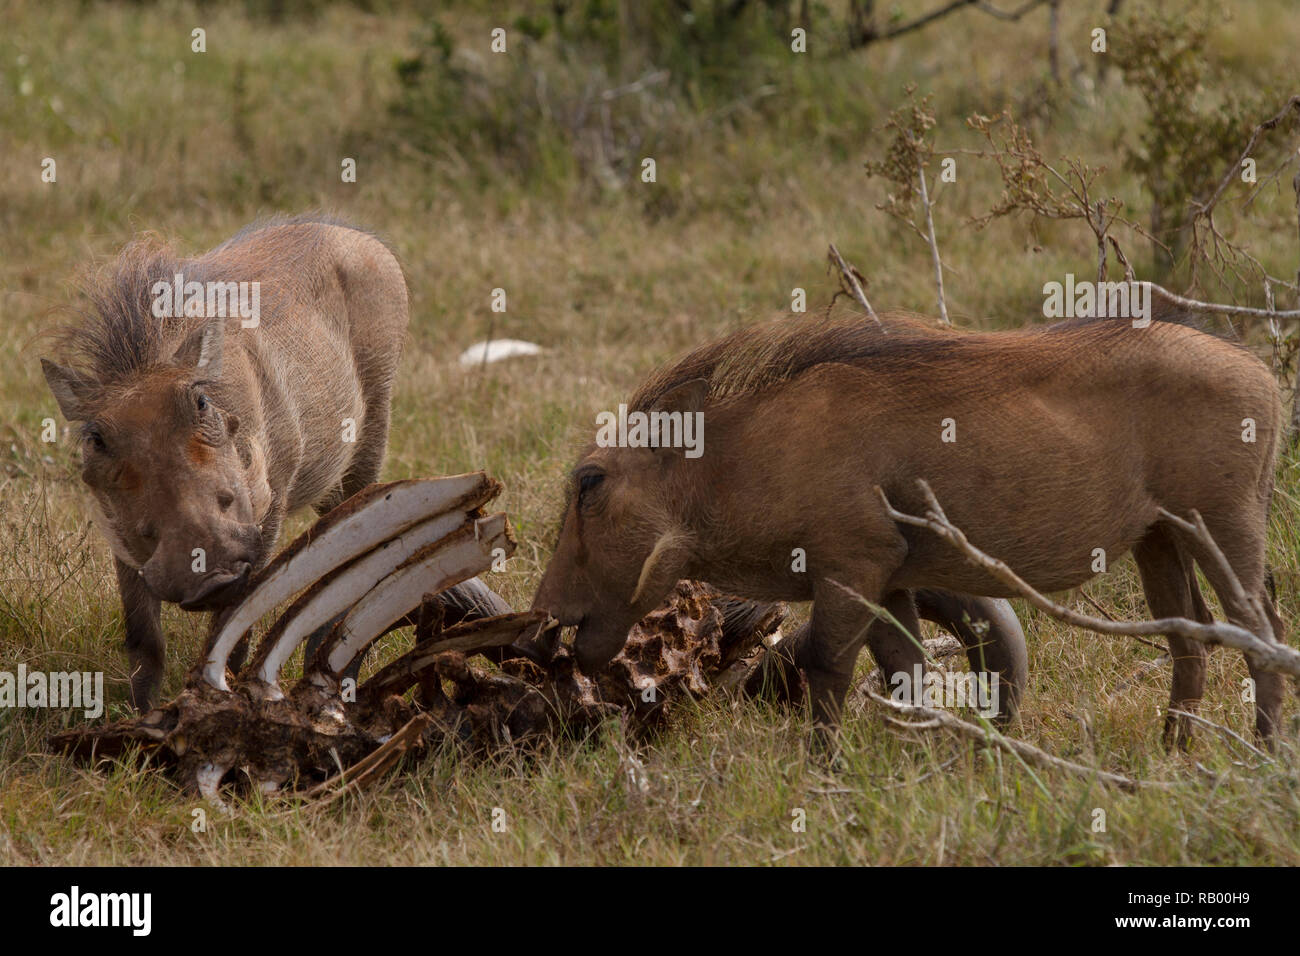 Warthogs, mainly herbivores, eating meat off a carcass in Addo Elephant National Park, South Africa. Stock Photo